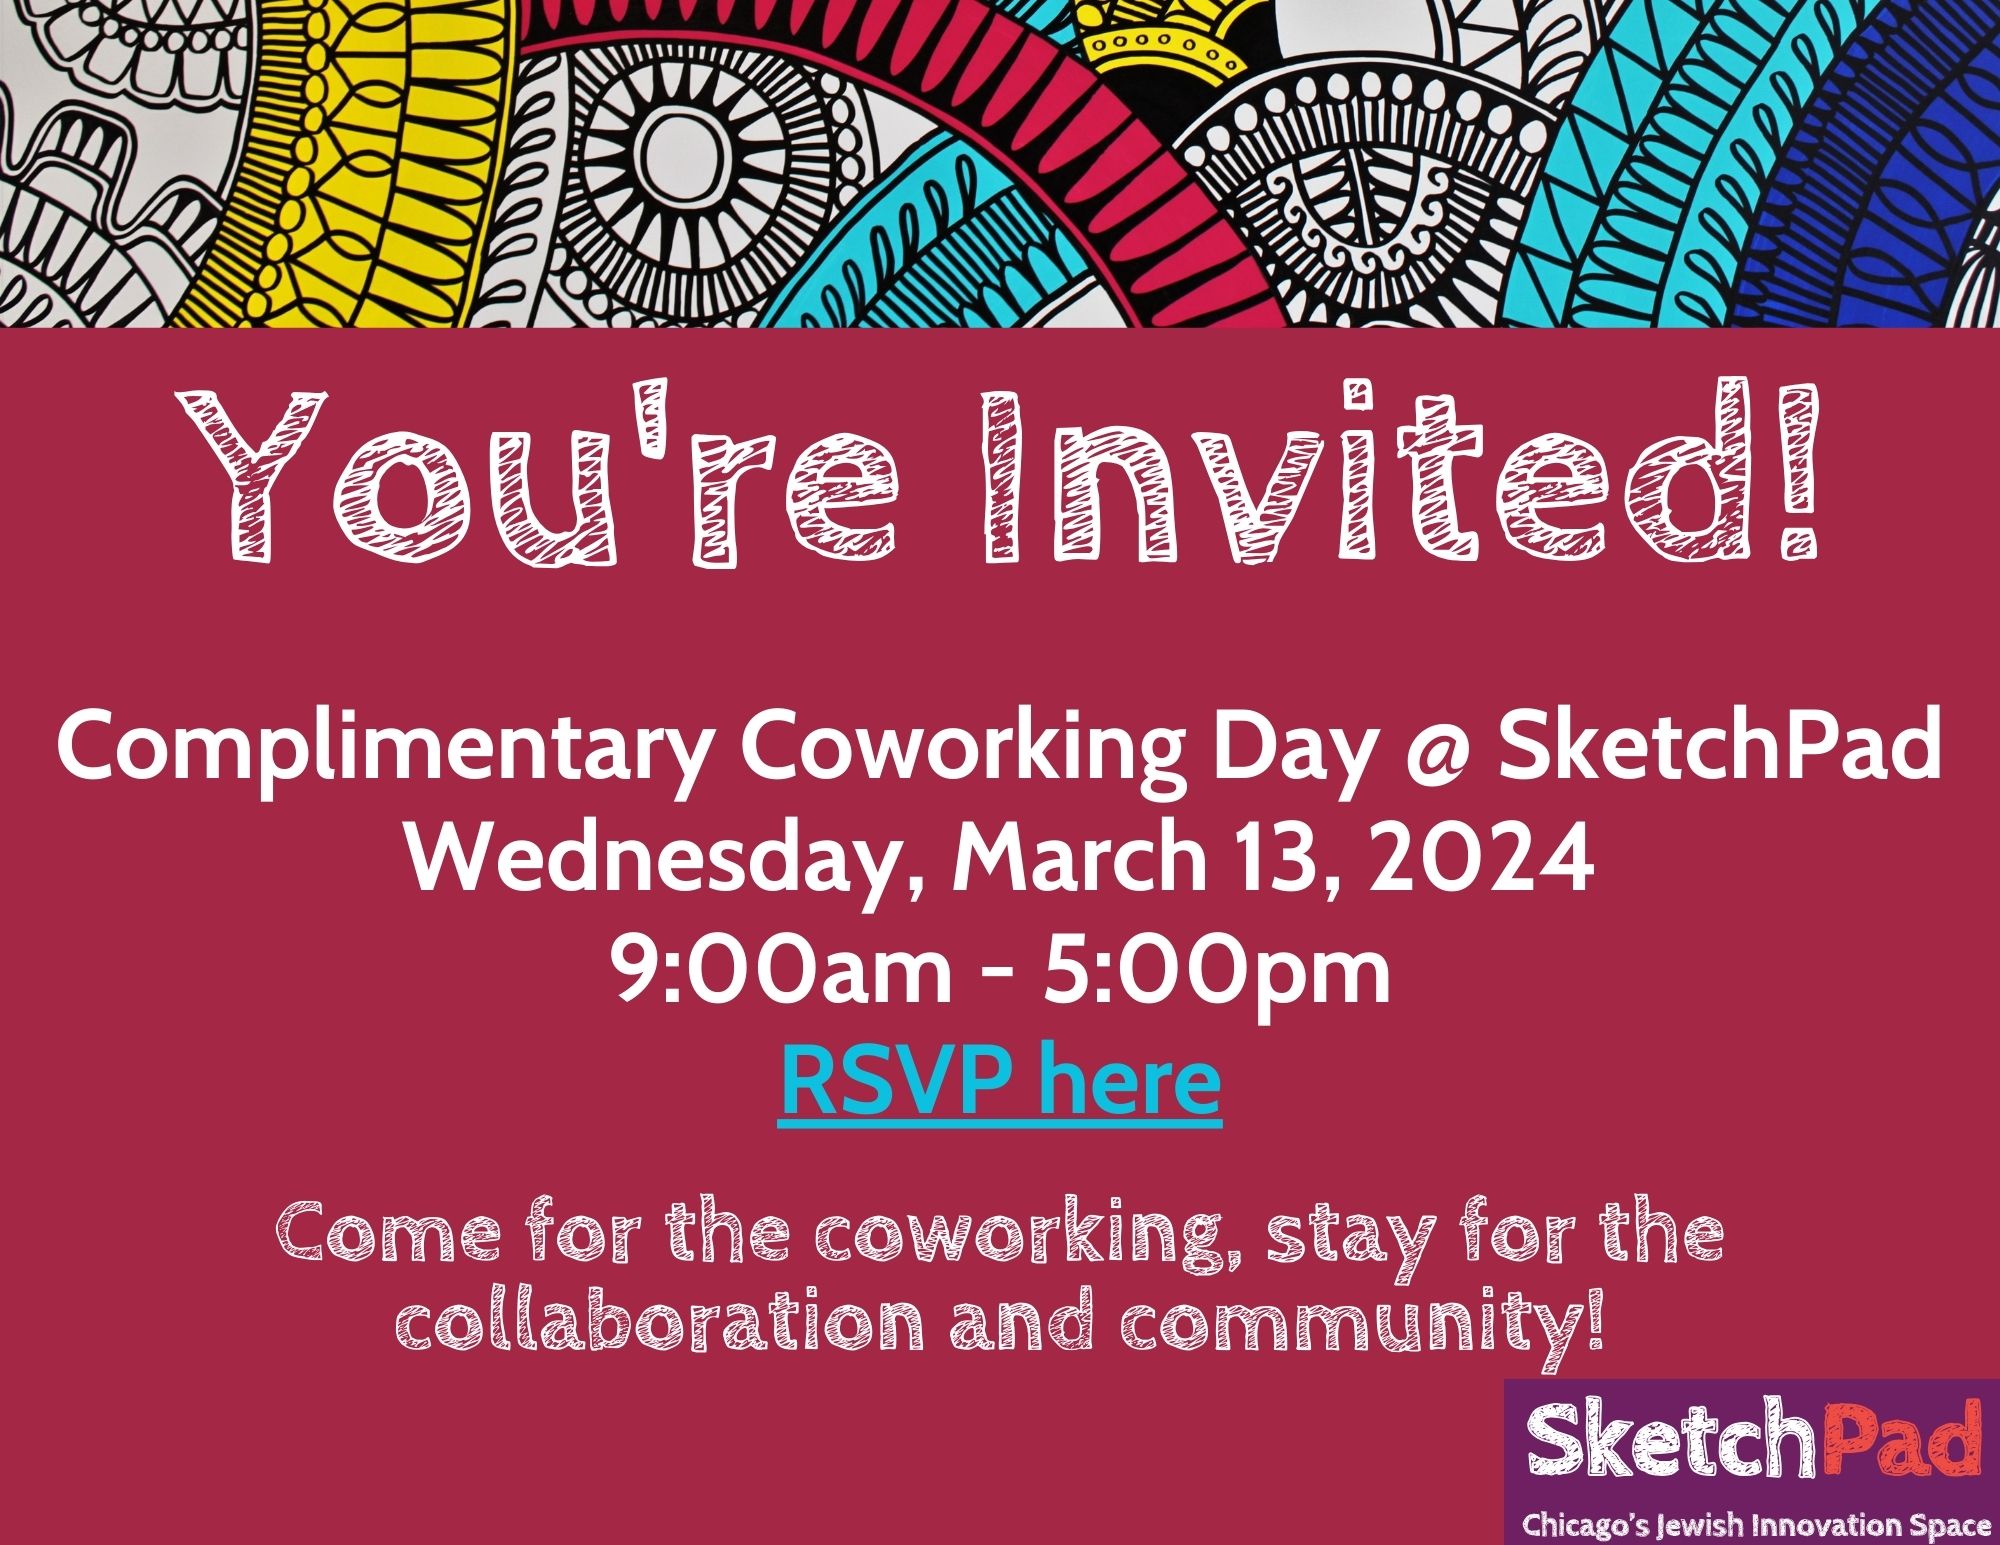 Complimentary Coworking Day at SketchPad!